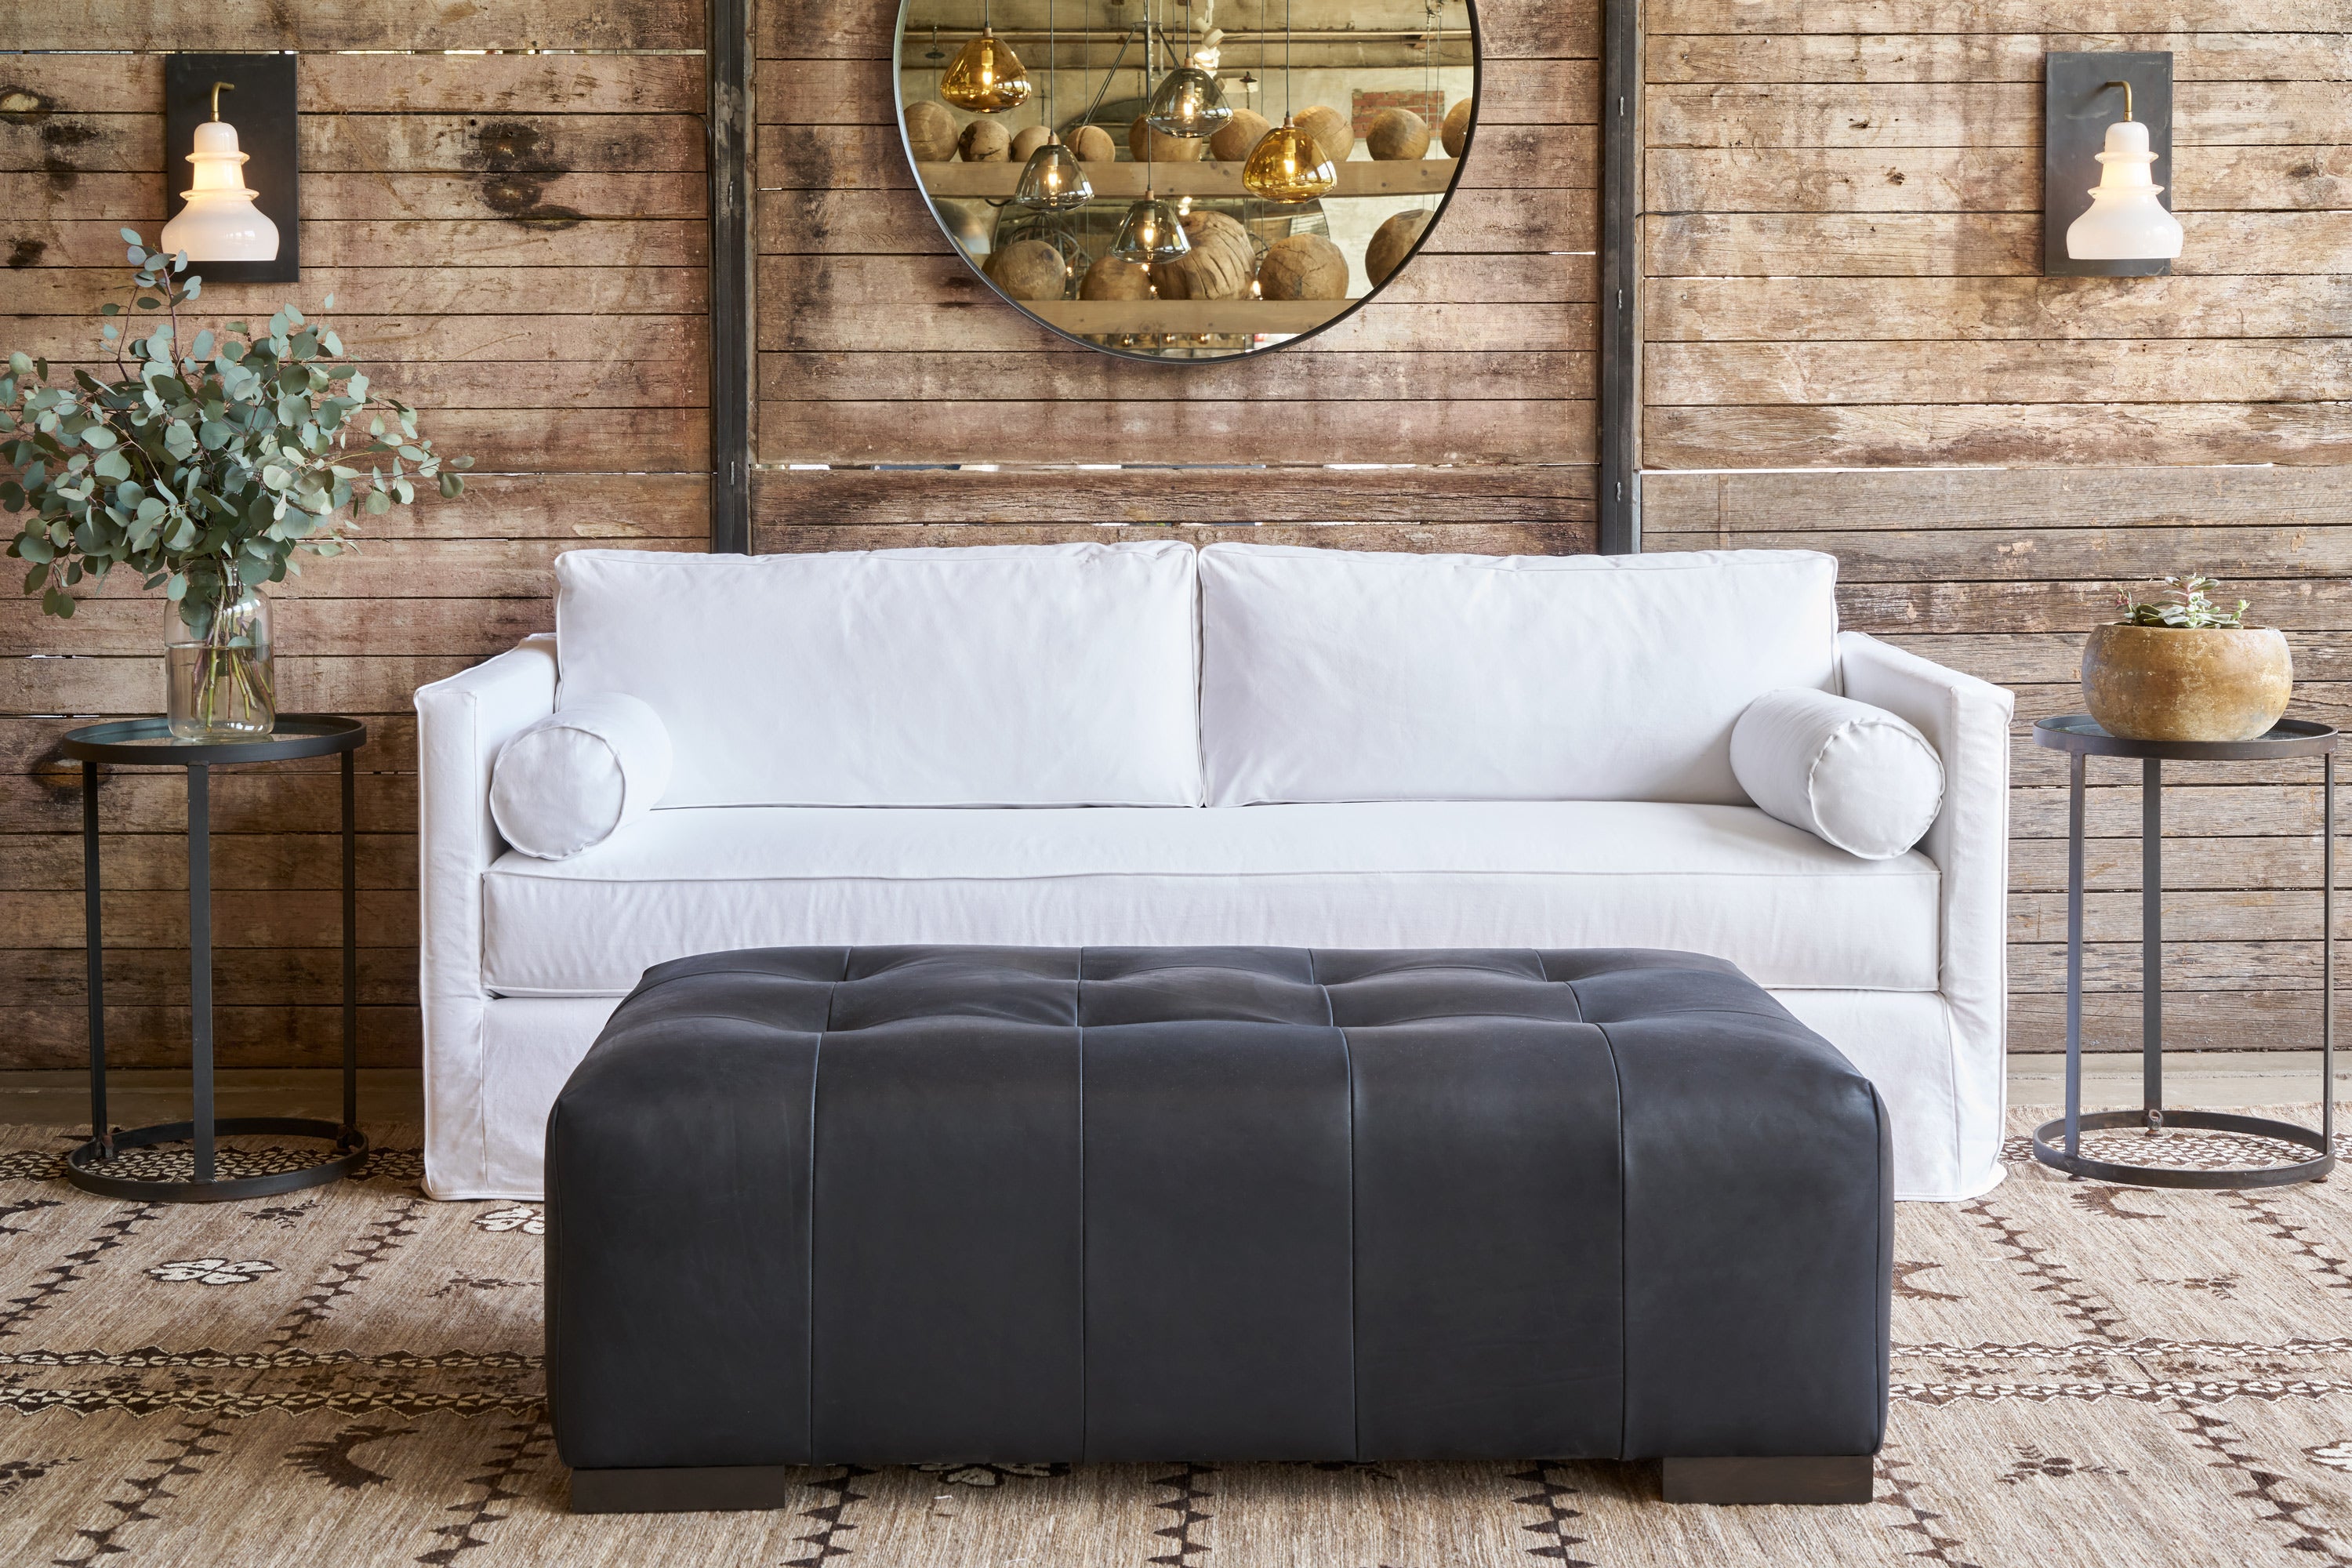 Polish upholstery supplier acquires stake in DFS - Big Furniture Group